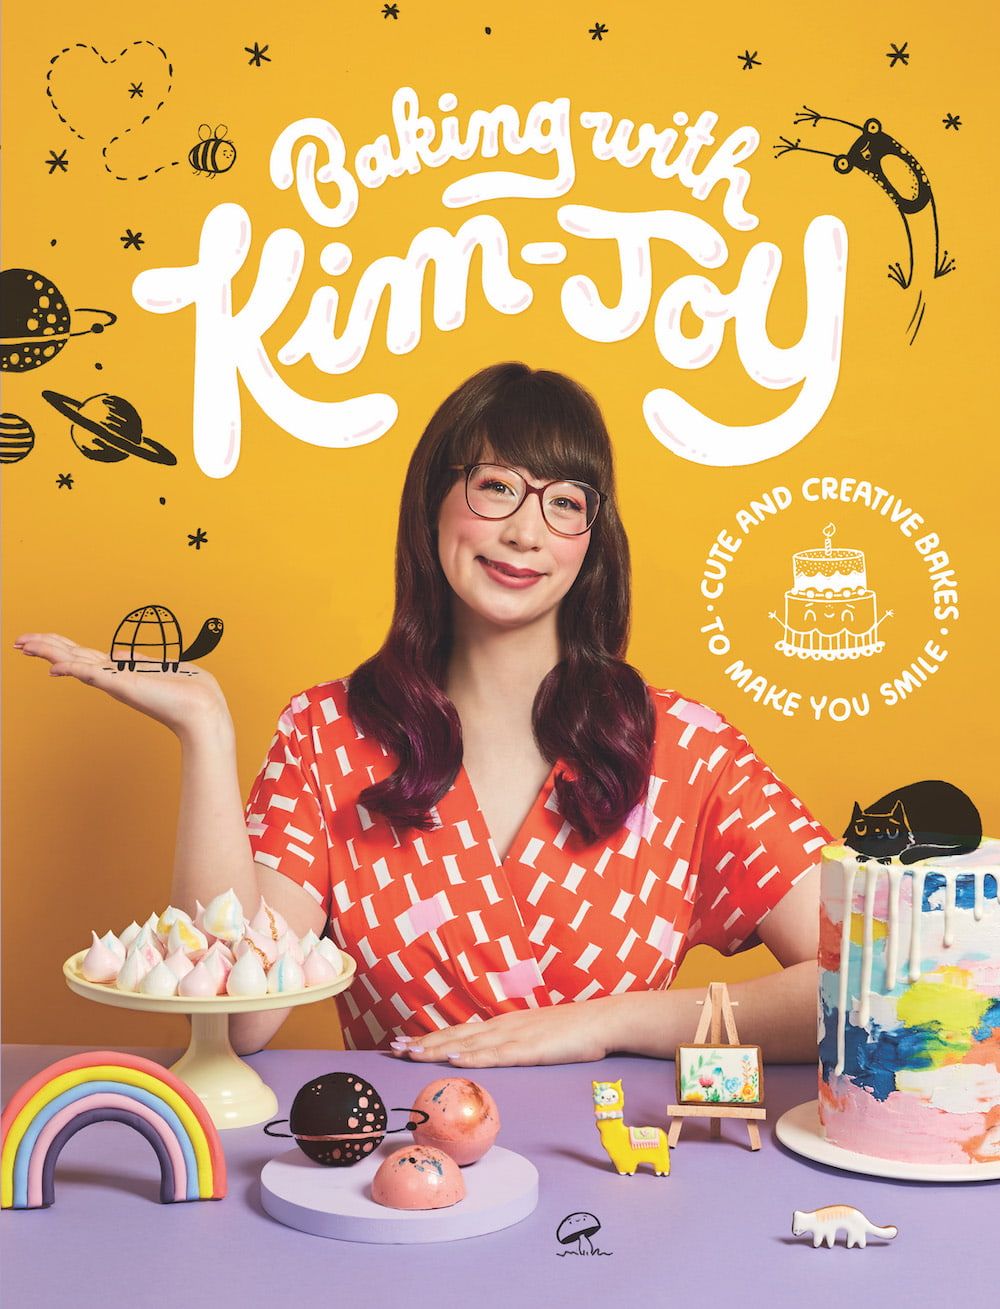 Baking with Kim-Joy book cover